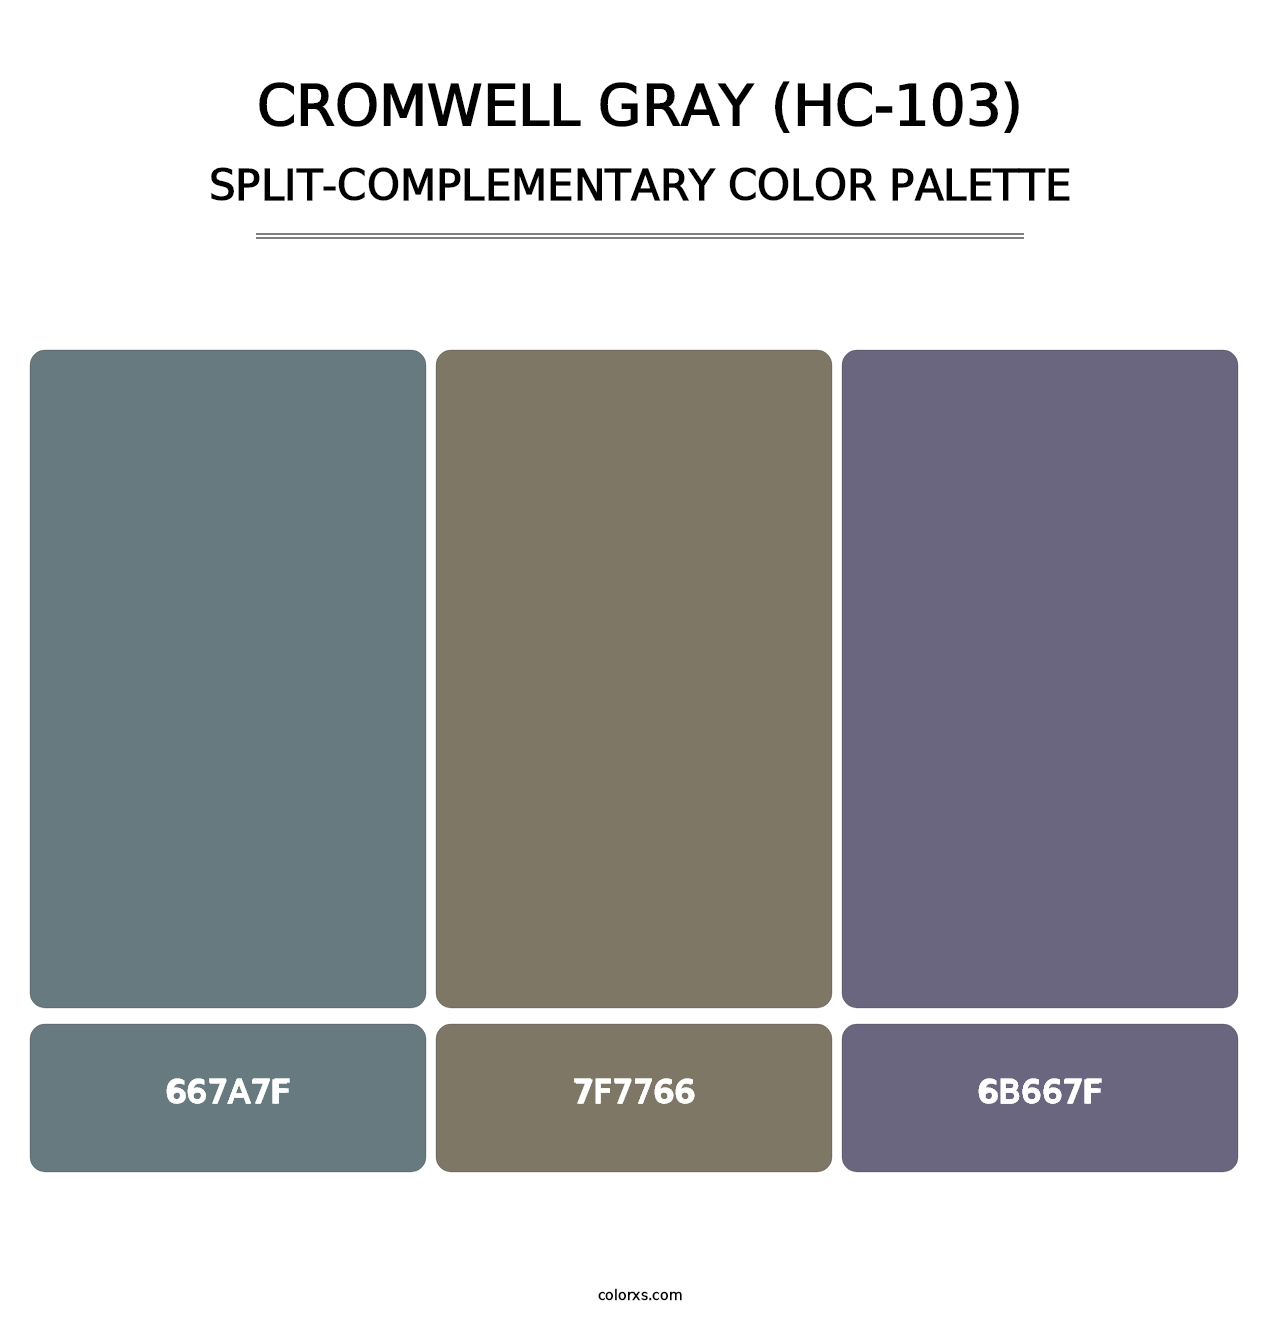 Cromwell Gray (HC-103) - Split-Complementary Color Palette